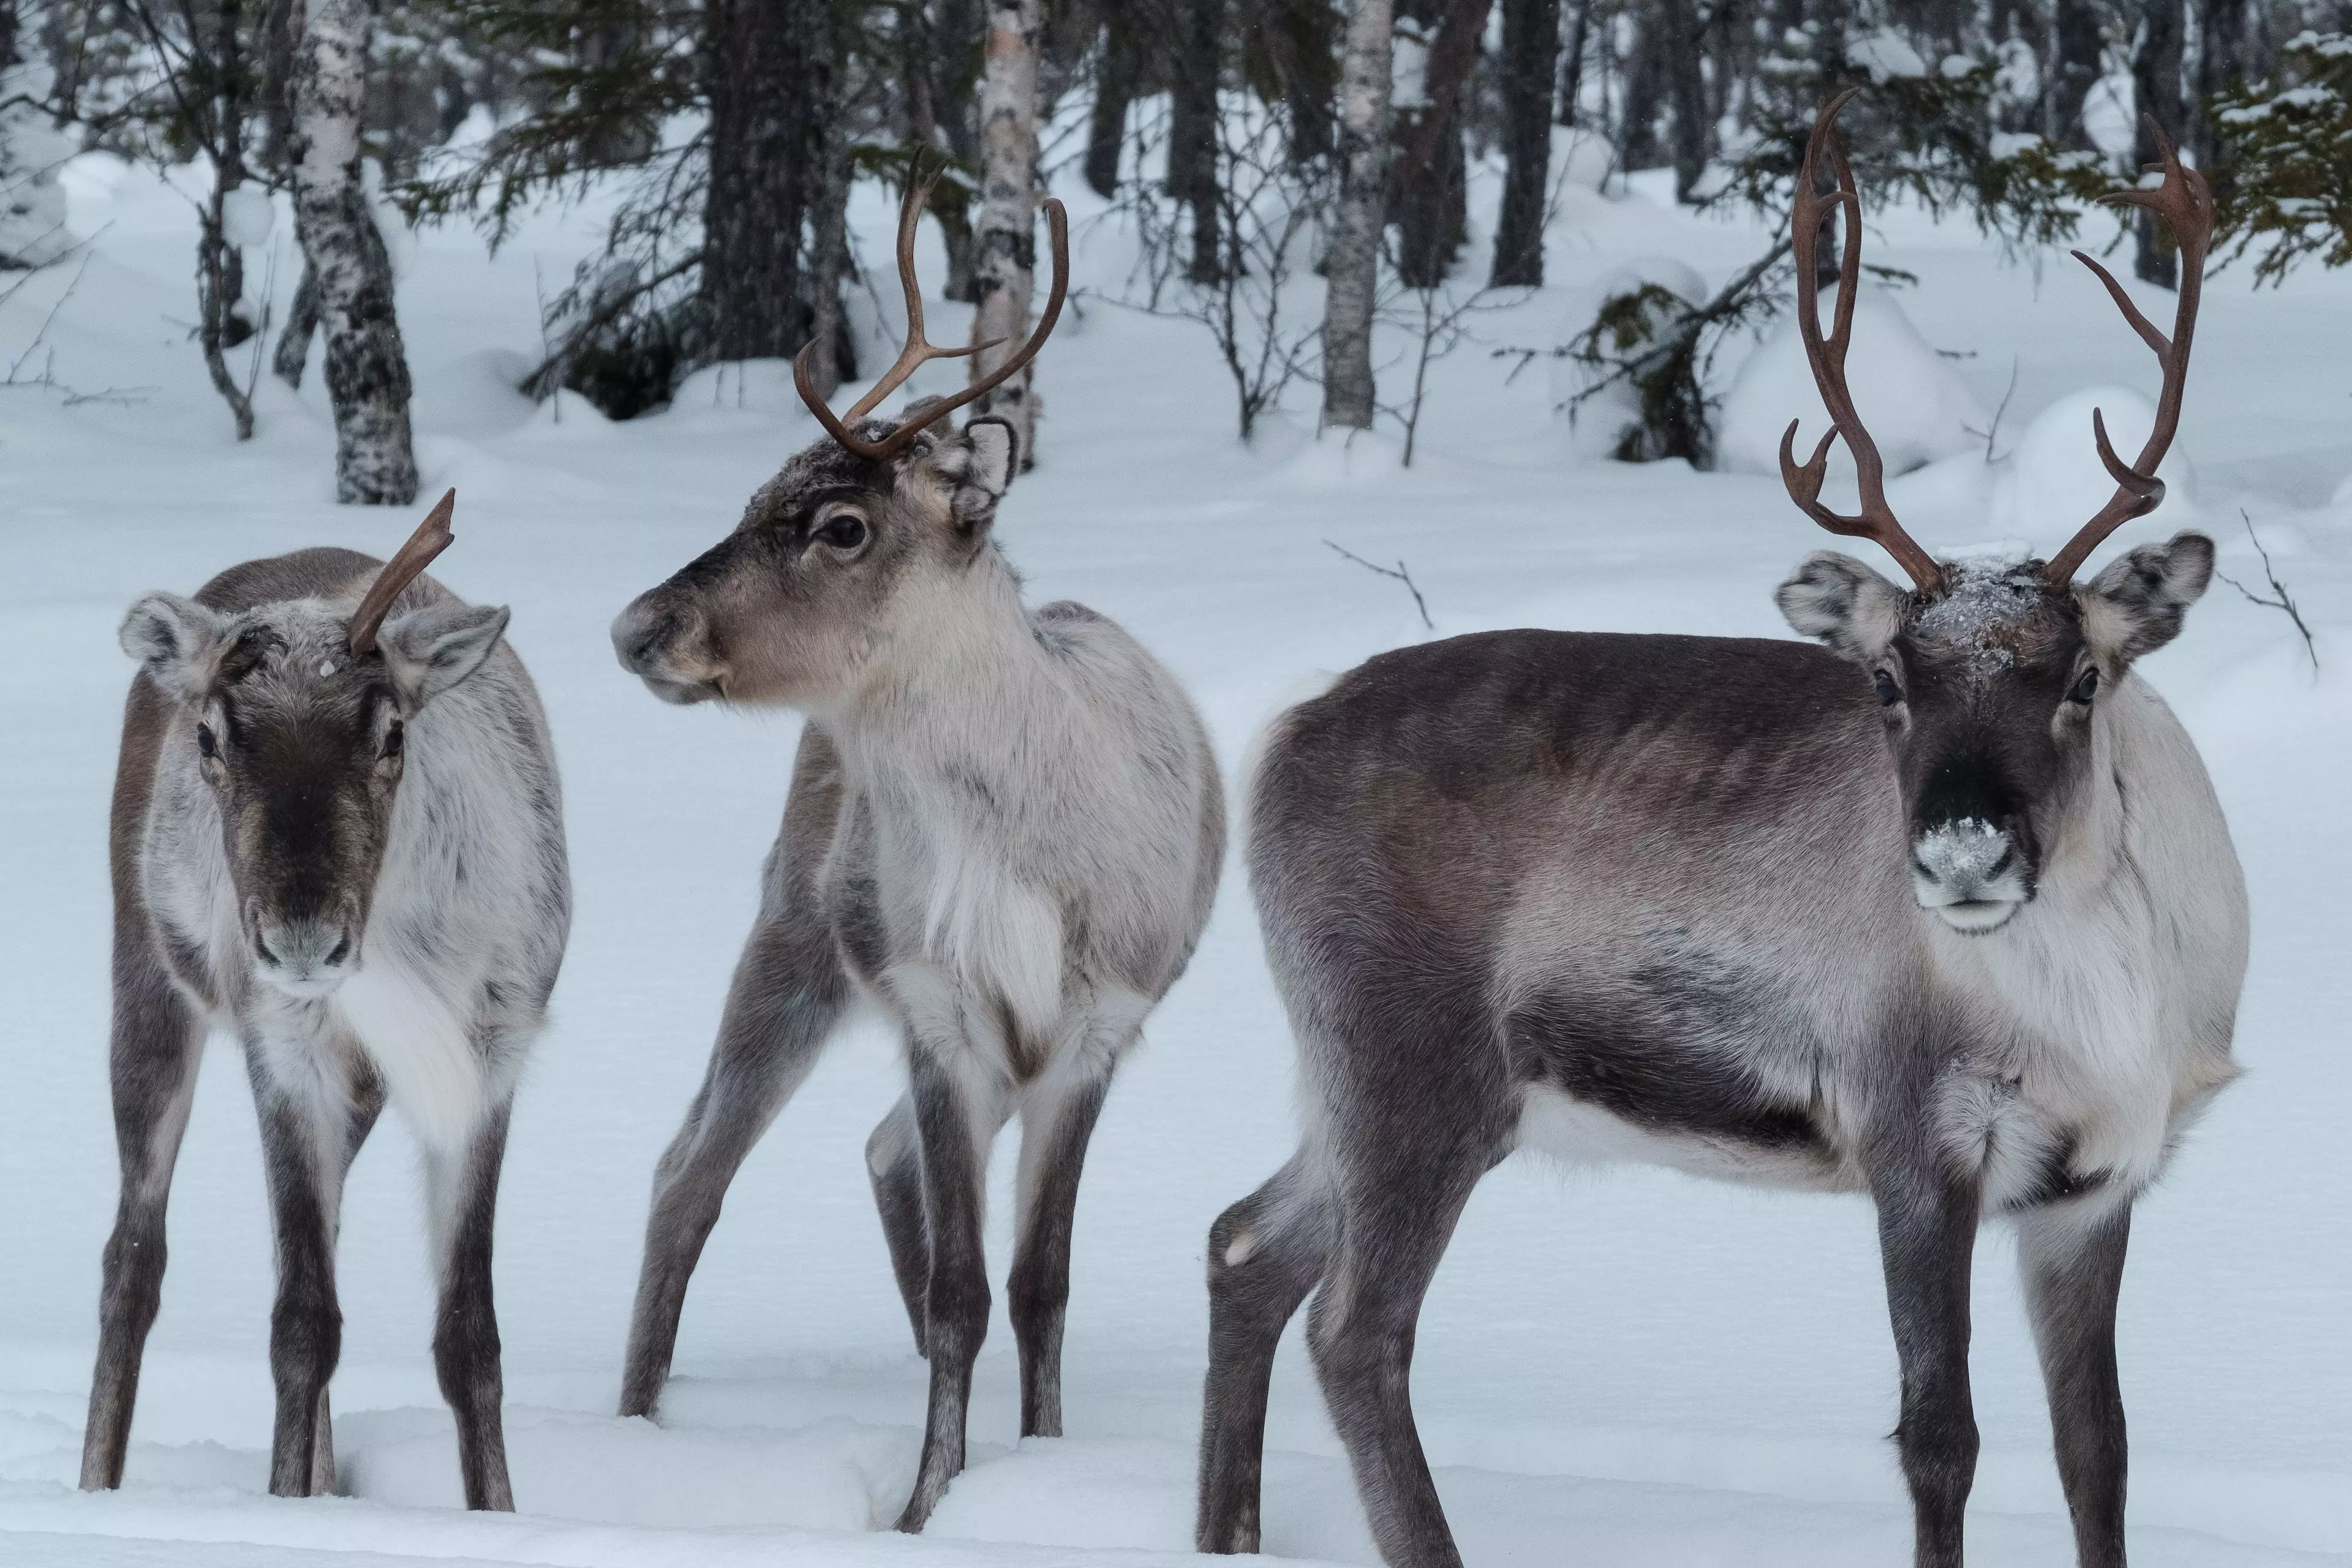 Lapland is ordinarily a winter wonderland at this time of year.